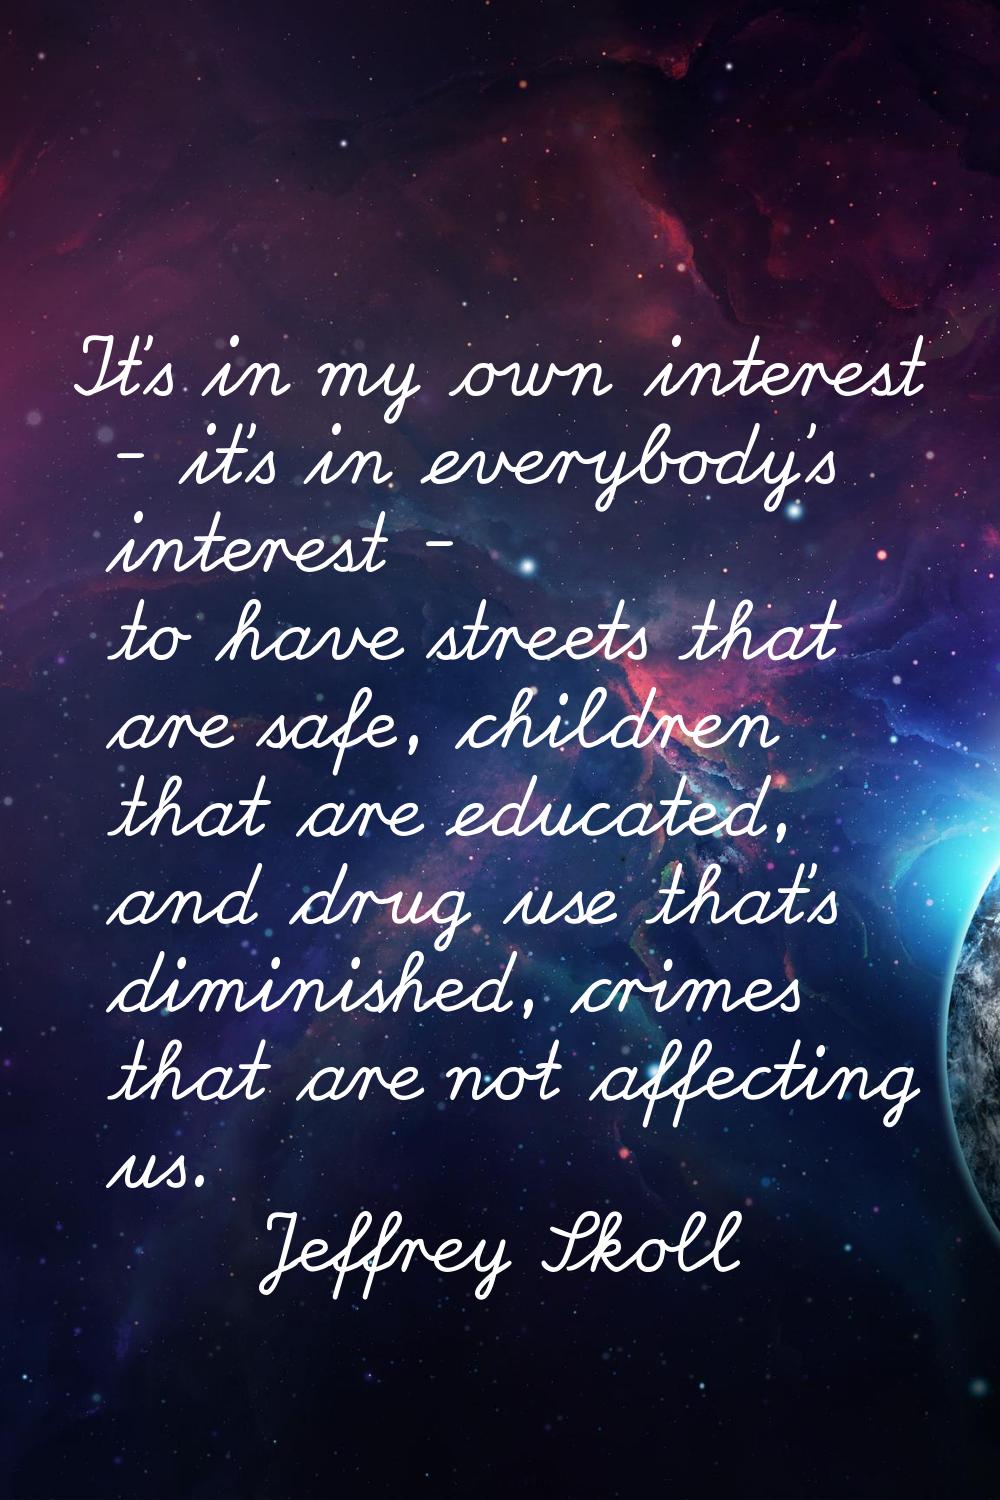 It's in my own interest - it's in everybody's interest - to have streets that are safe, children th